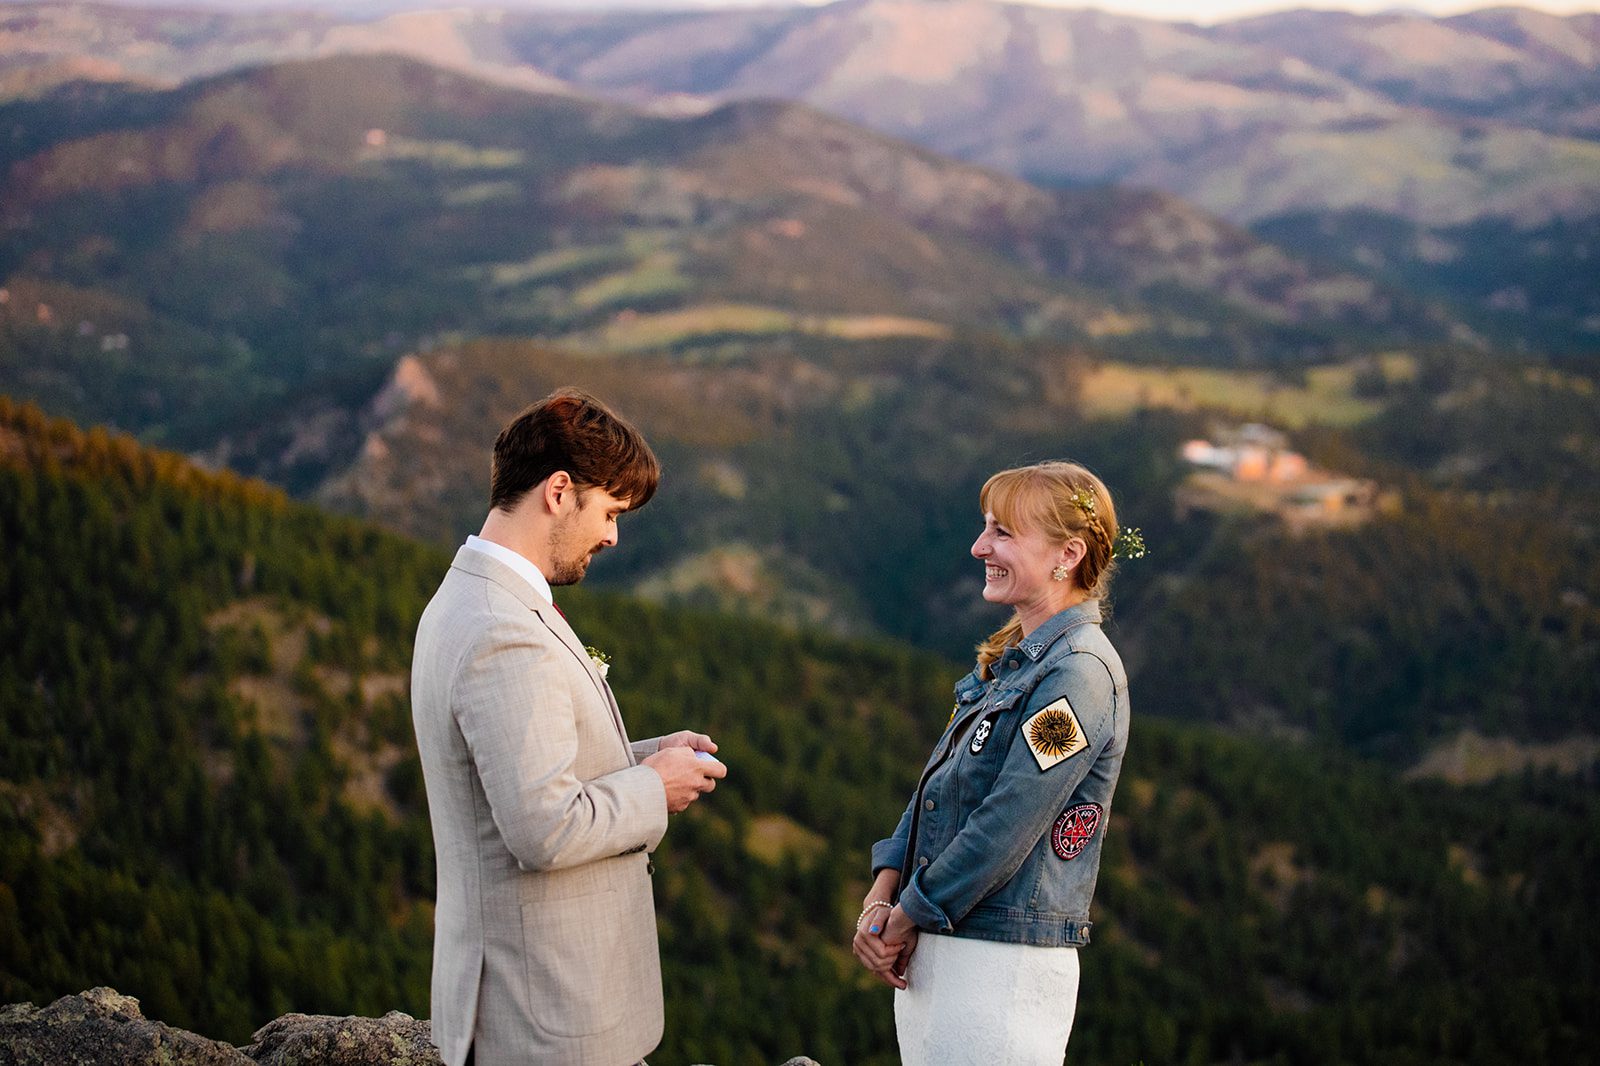 bride smiles sweetly as groom reads his vows at sunrise during Lost Gulch Overlook elopement ceremony